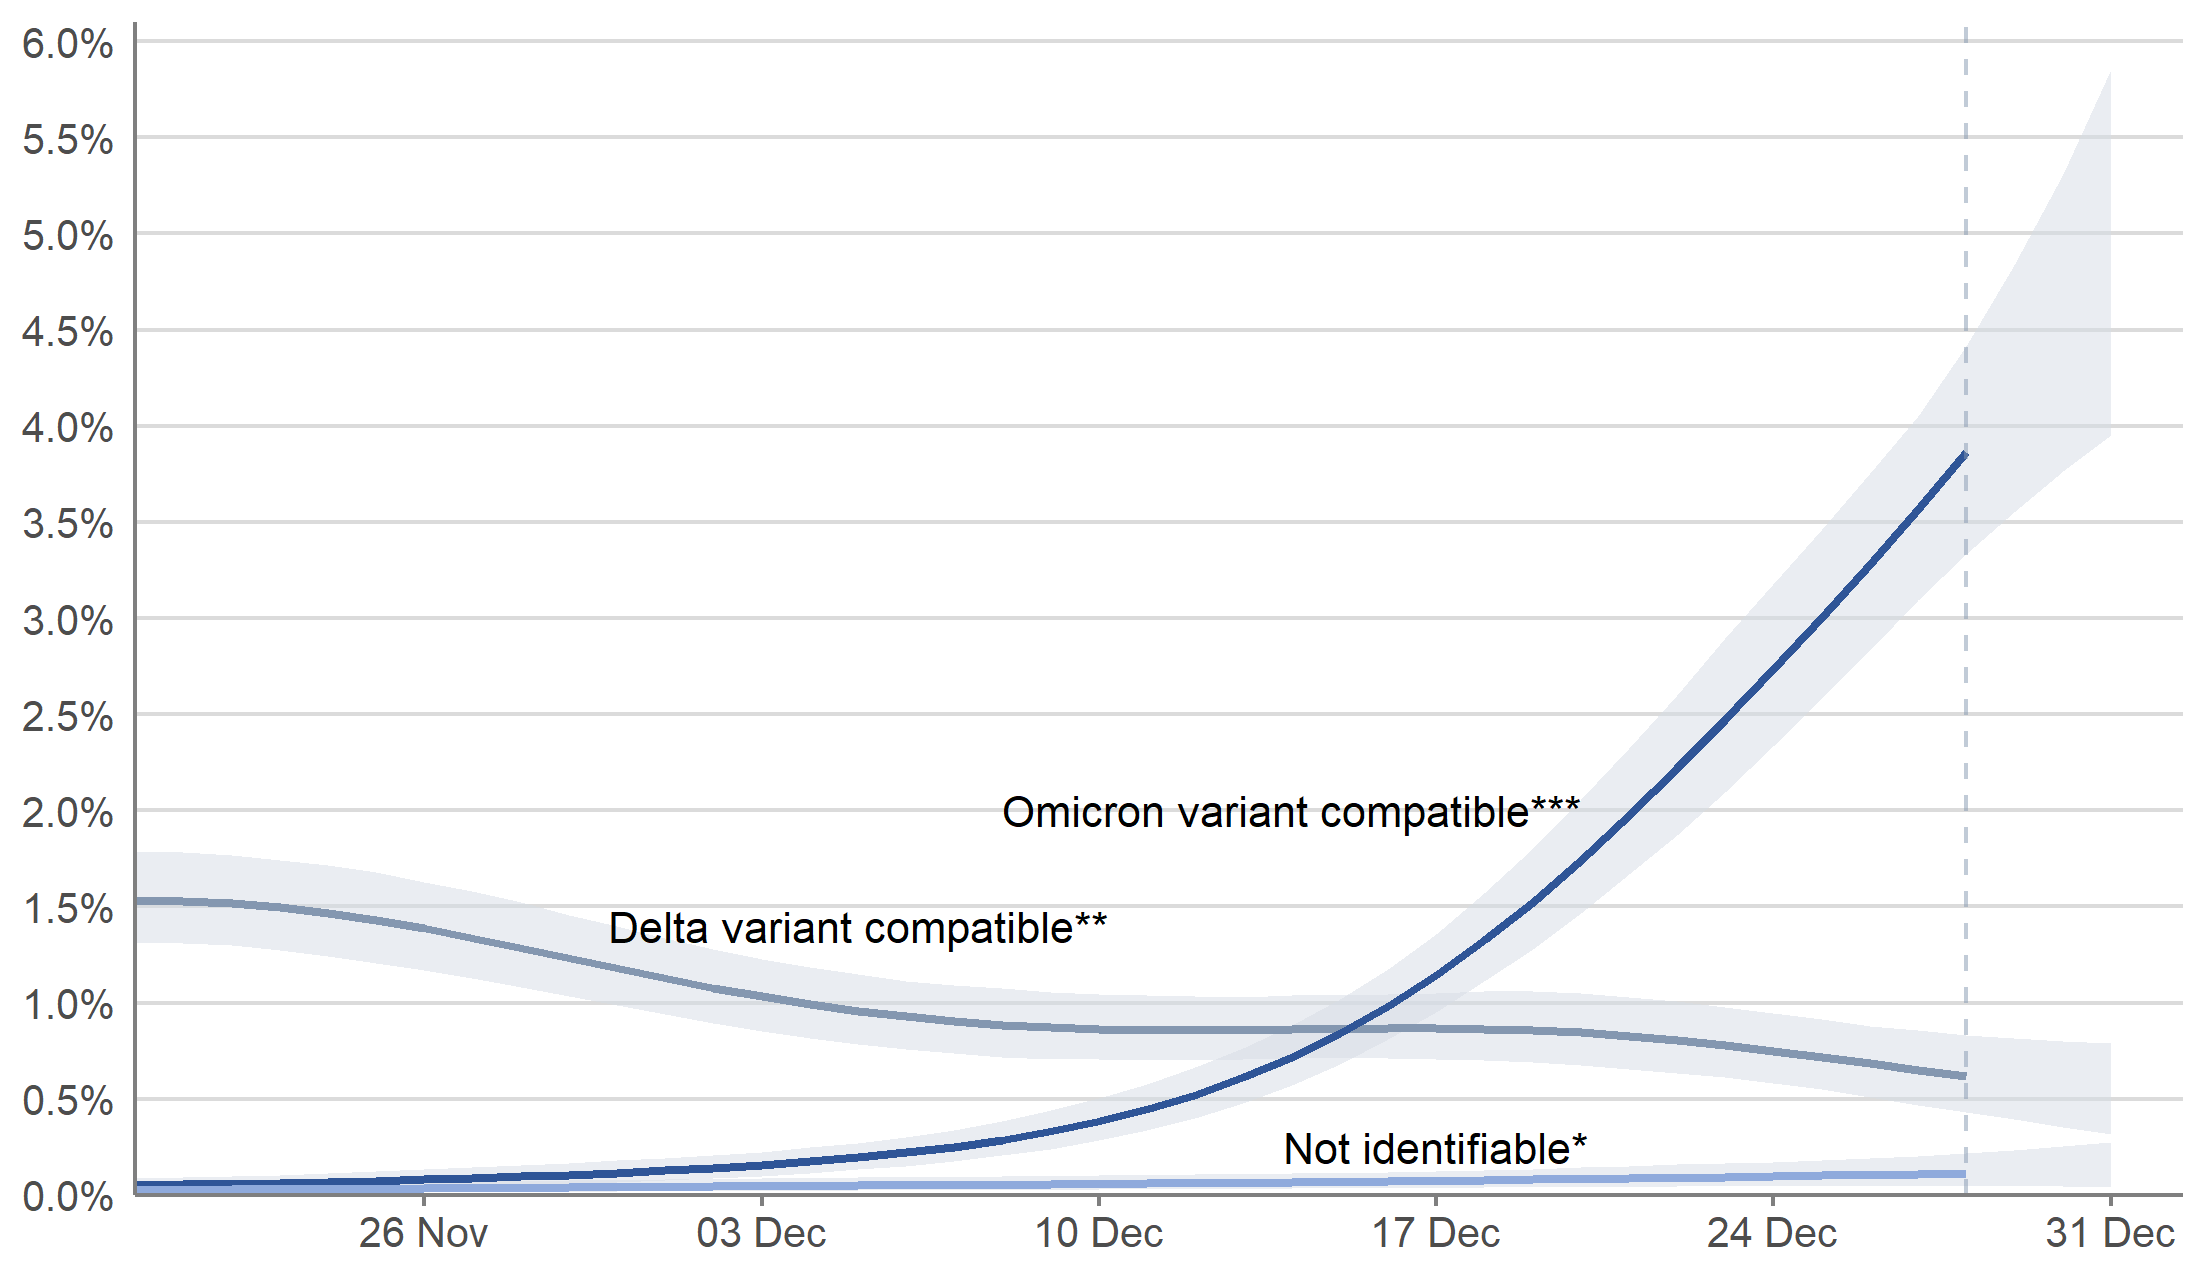 In Scotland, the estimated percentage of the population living in private residential households testing positive for cases compatible with the Omicron variant of COVID-19 has continued to increase in the most recent week from 25 to 31 December 2021. In the same week, the percentage of people testing positive for Delta variant compatible cases (B.1. 617.2 and its genetic descendants) has decreased.